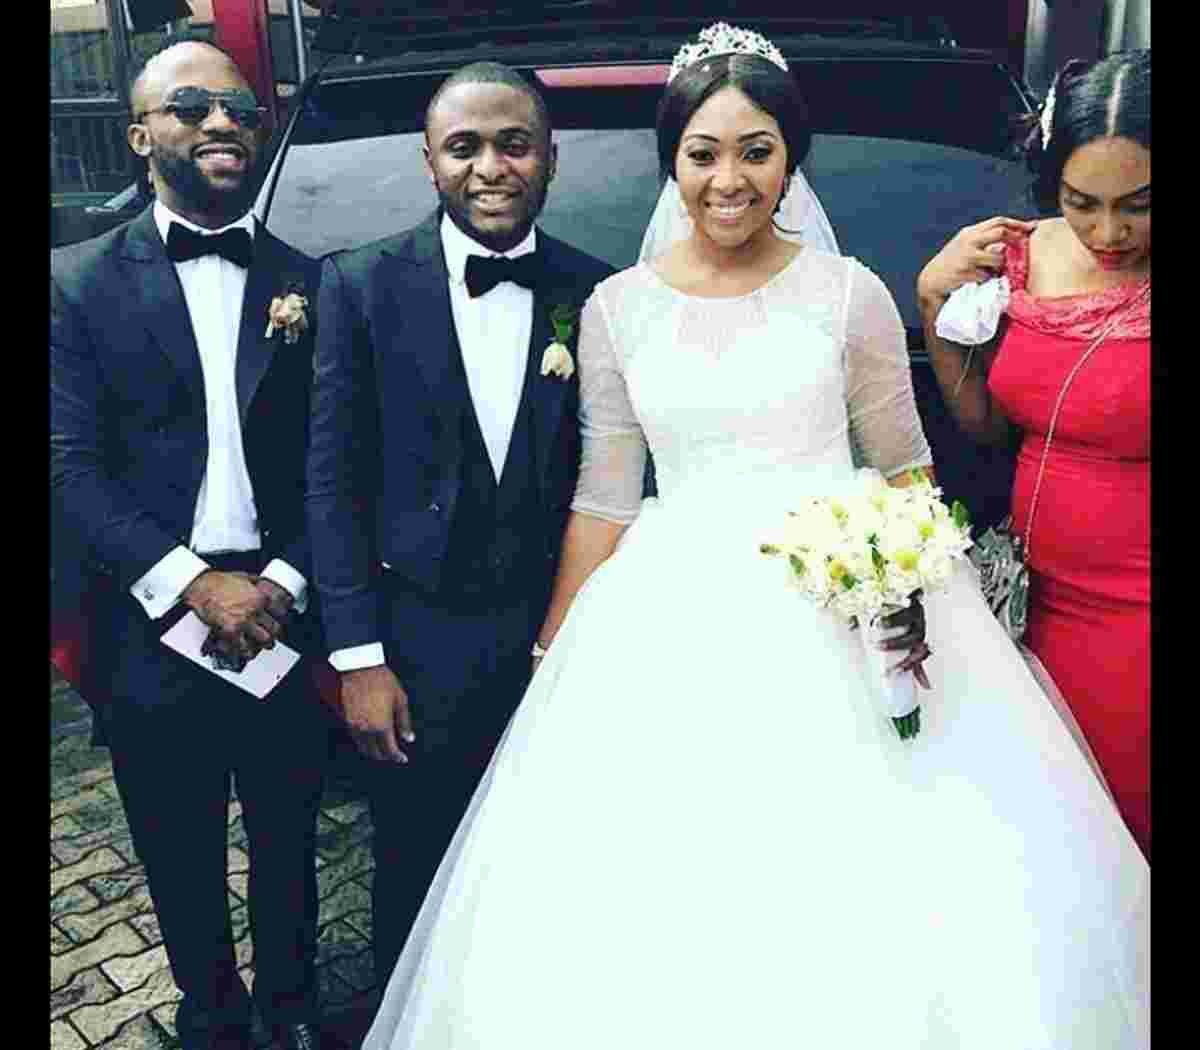 Who Is Ubi Franklin, Biography, Net Worth, State, Wife, Occupation